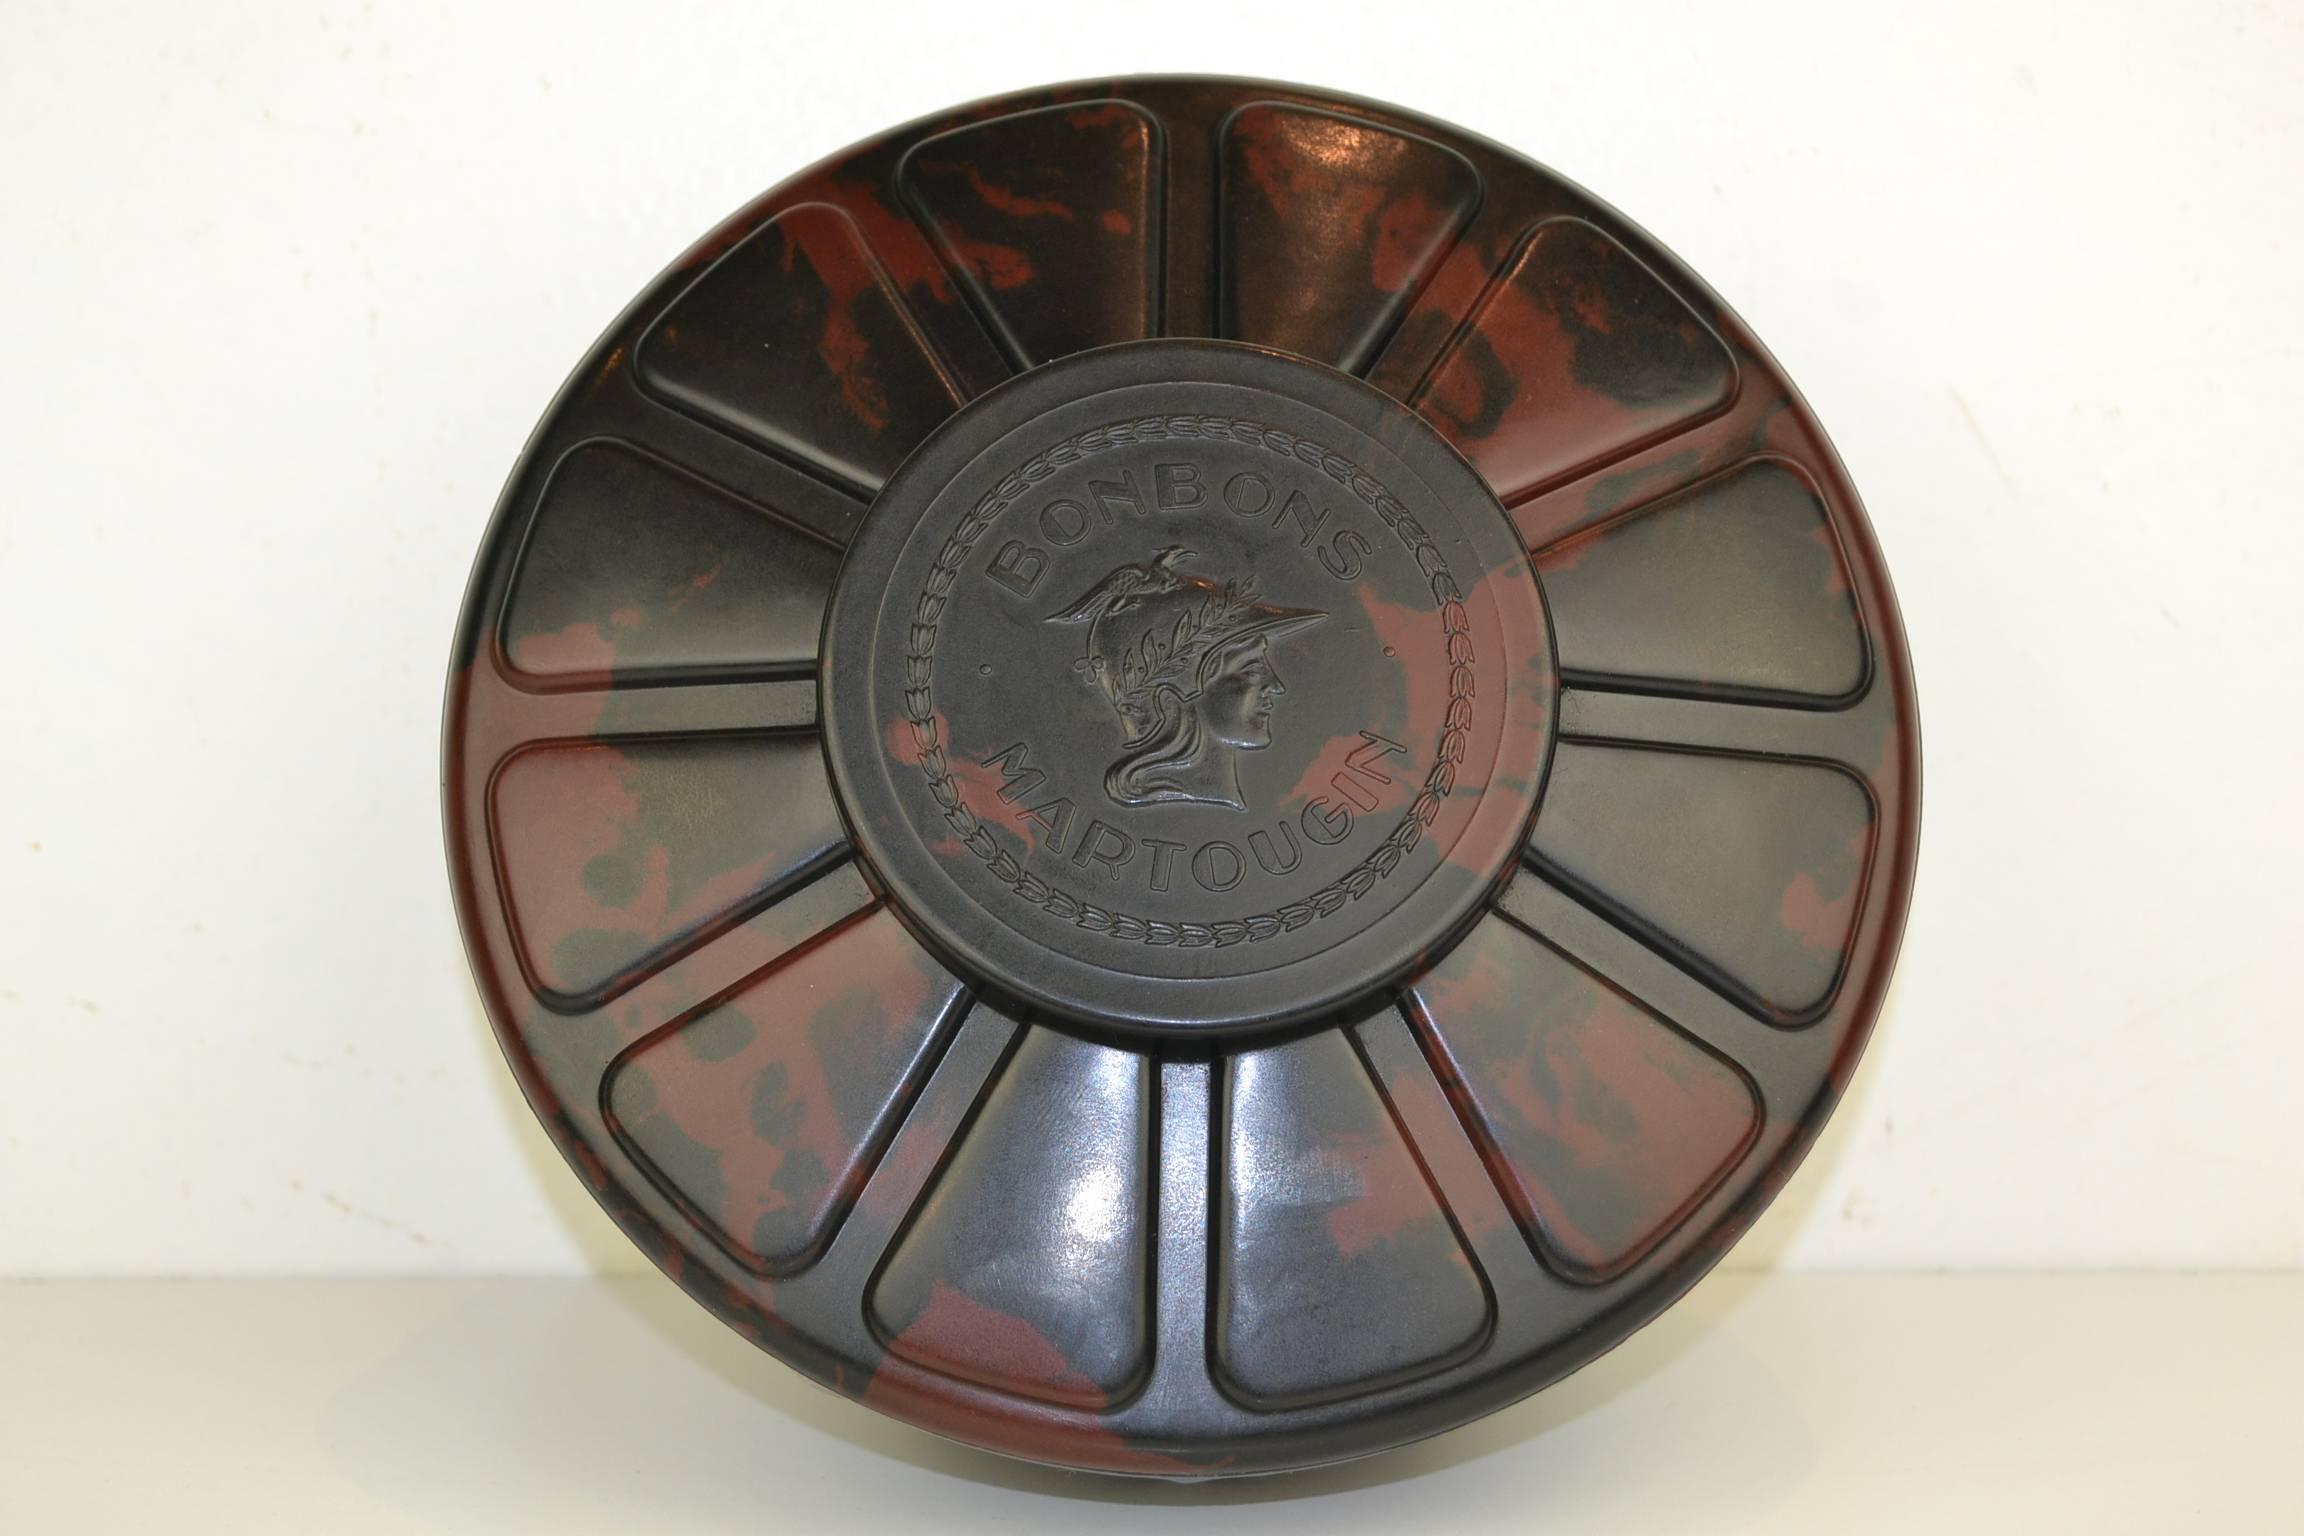 Stylish  Art Deco Bakelite Chocolate Box for Belgian Chocolate Martougin. 
This Chocolate Storage Box or Chocolate Gift Box dates from the 1920s. 
It's a beautiful Red with Brown flamed round bakelite box with Minerva Godess in relief on the cover